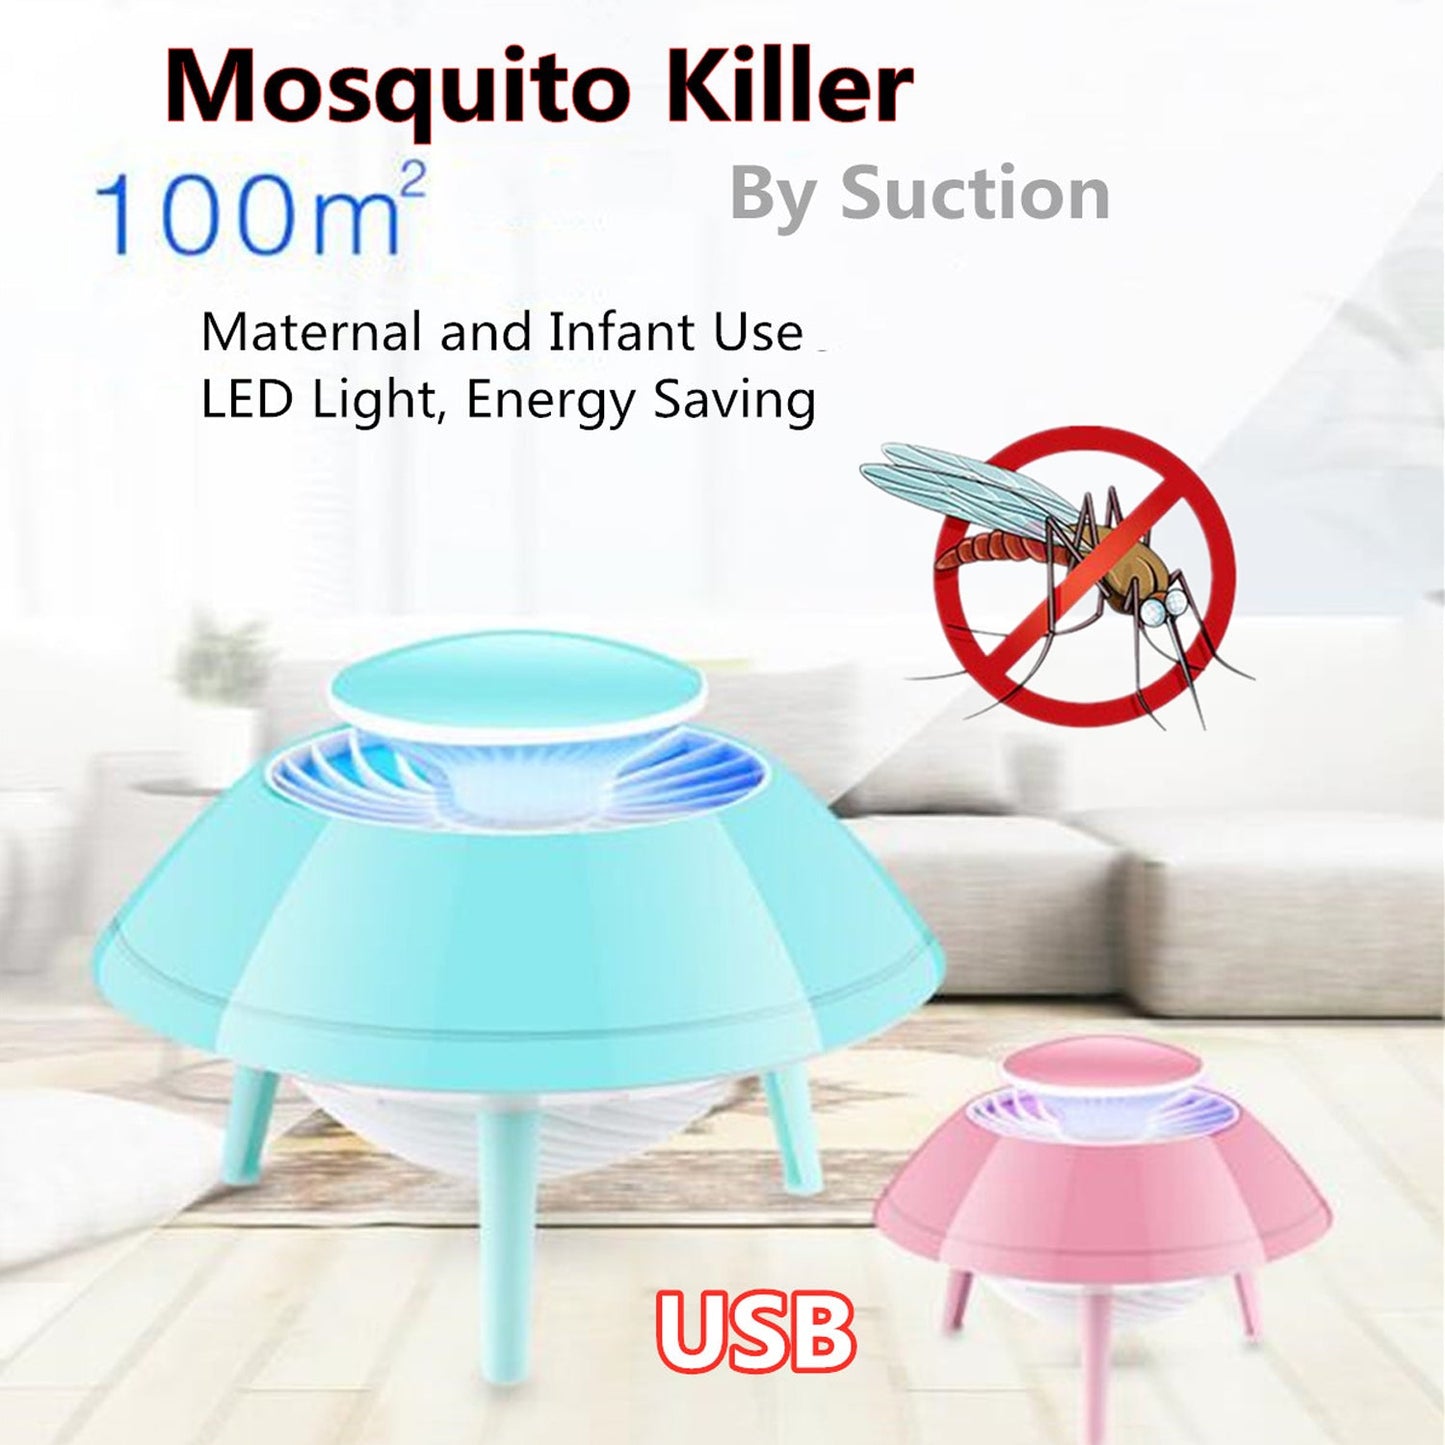 6465 Mosquito Trap Killer Space Ship Design lamp Flying saucer mosquito catcher suction Machine - SWASTIK CREATIONS The Trend Point SWASTIK CREATIONS The Trend Point